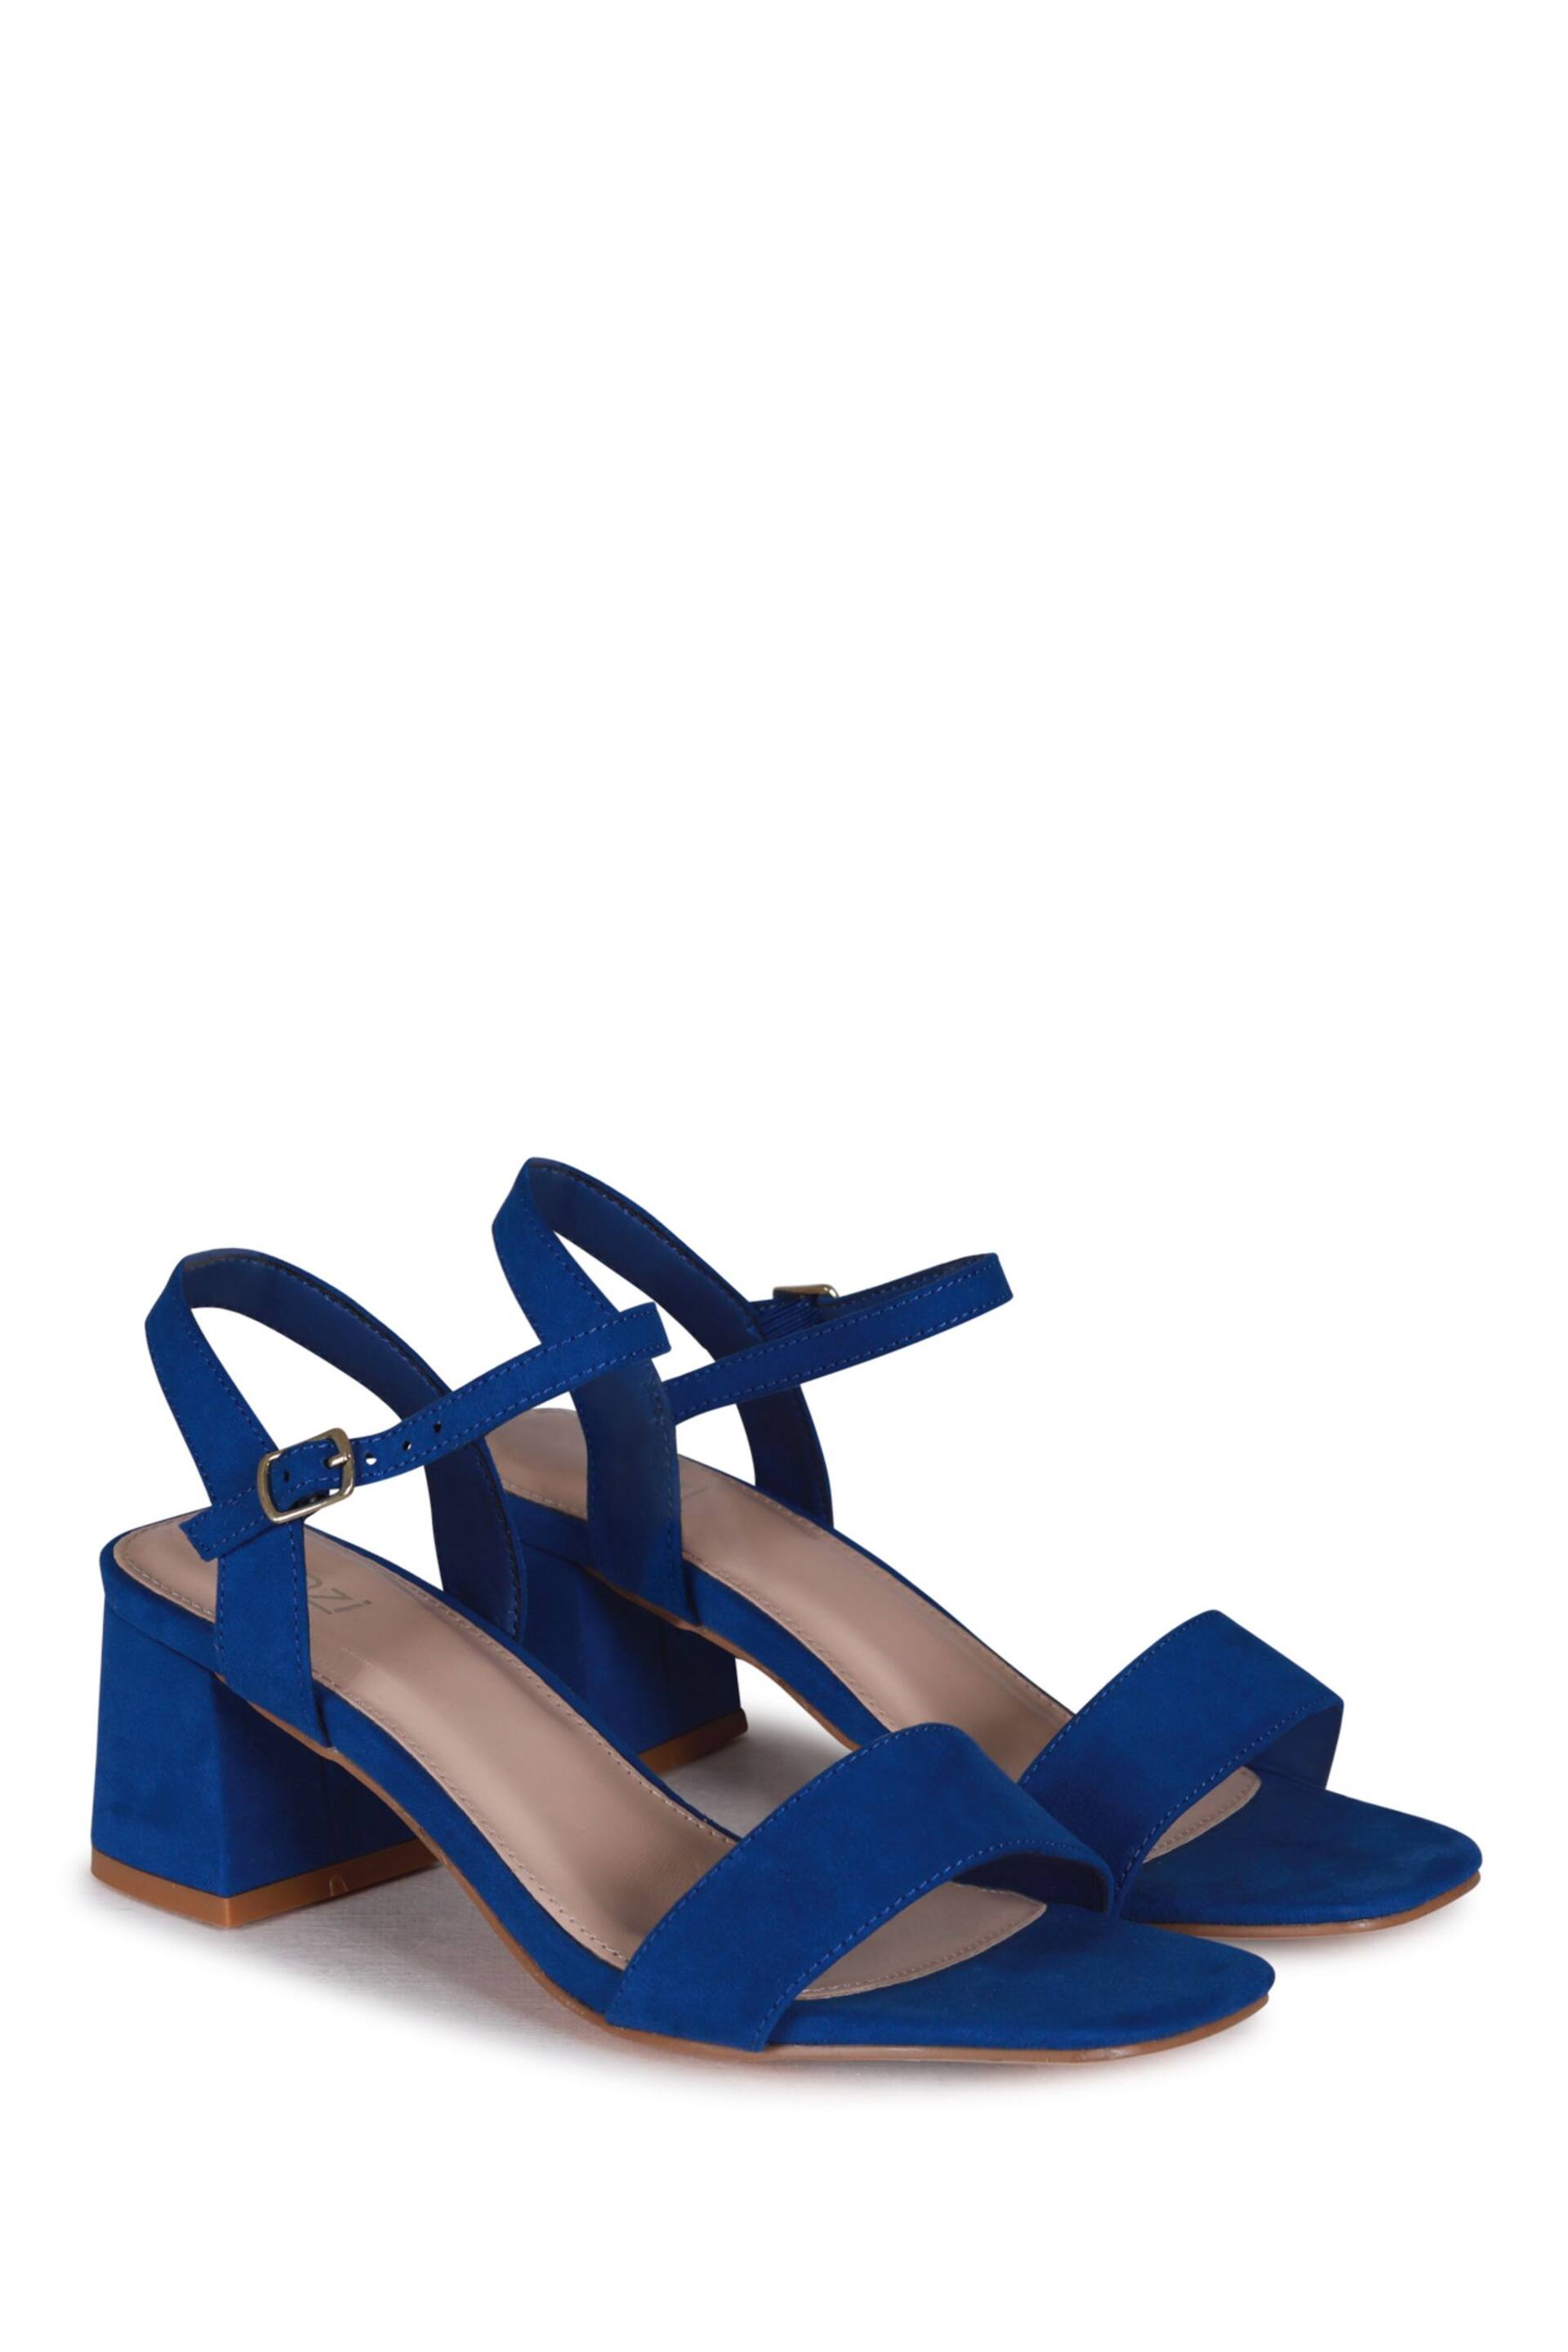 Linzi Cobalt Blue Darcie Barely There Block Heeled Sandals - Image 5 of 9